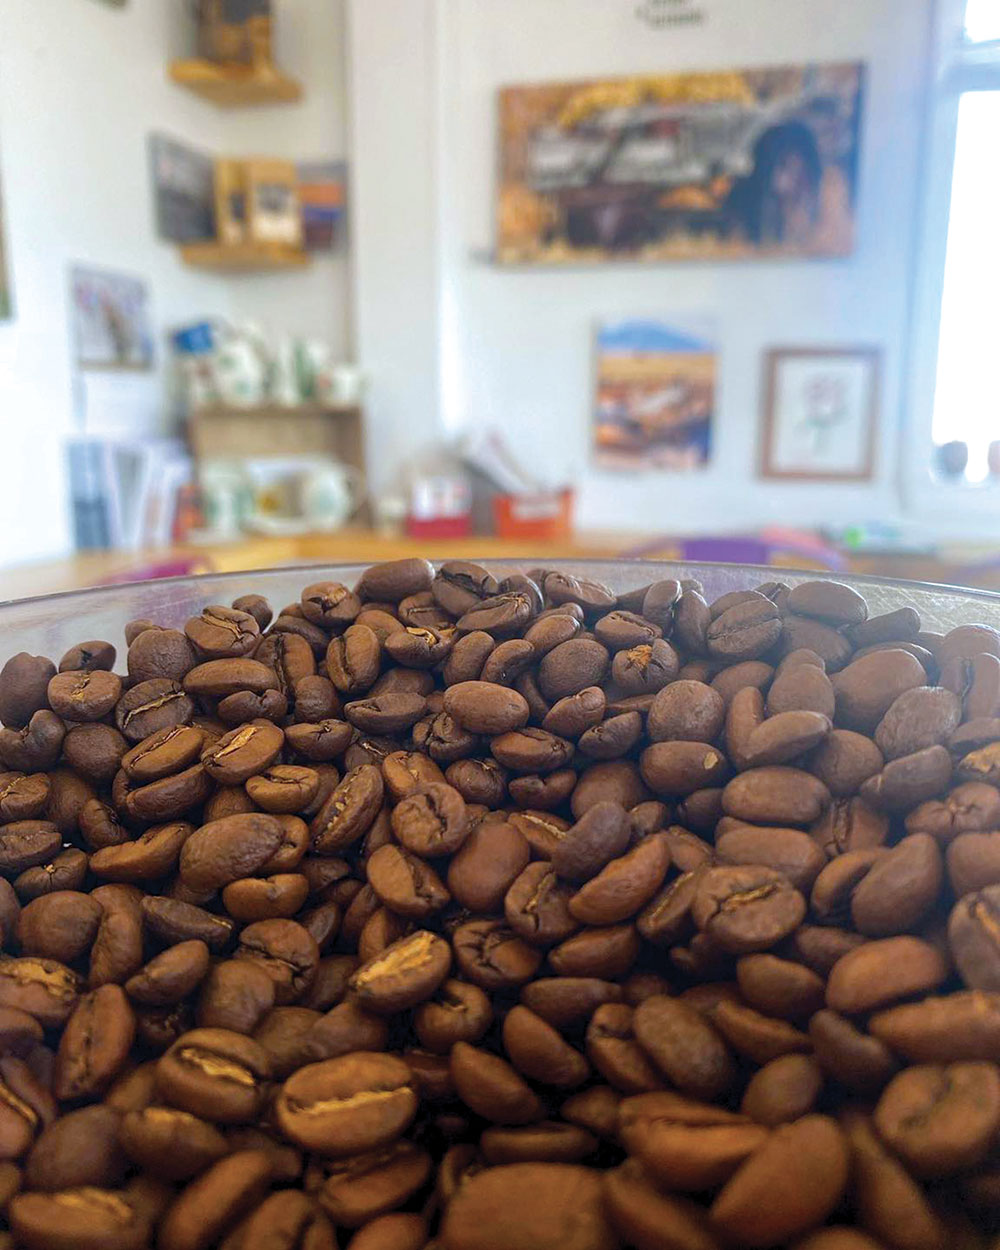 Collective Coffe Roaster in Elko, image shows a close-up of coffee beans, with books, magazines, and artwork in the background.